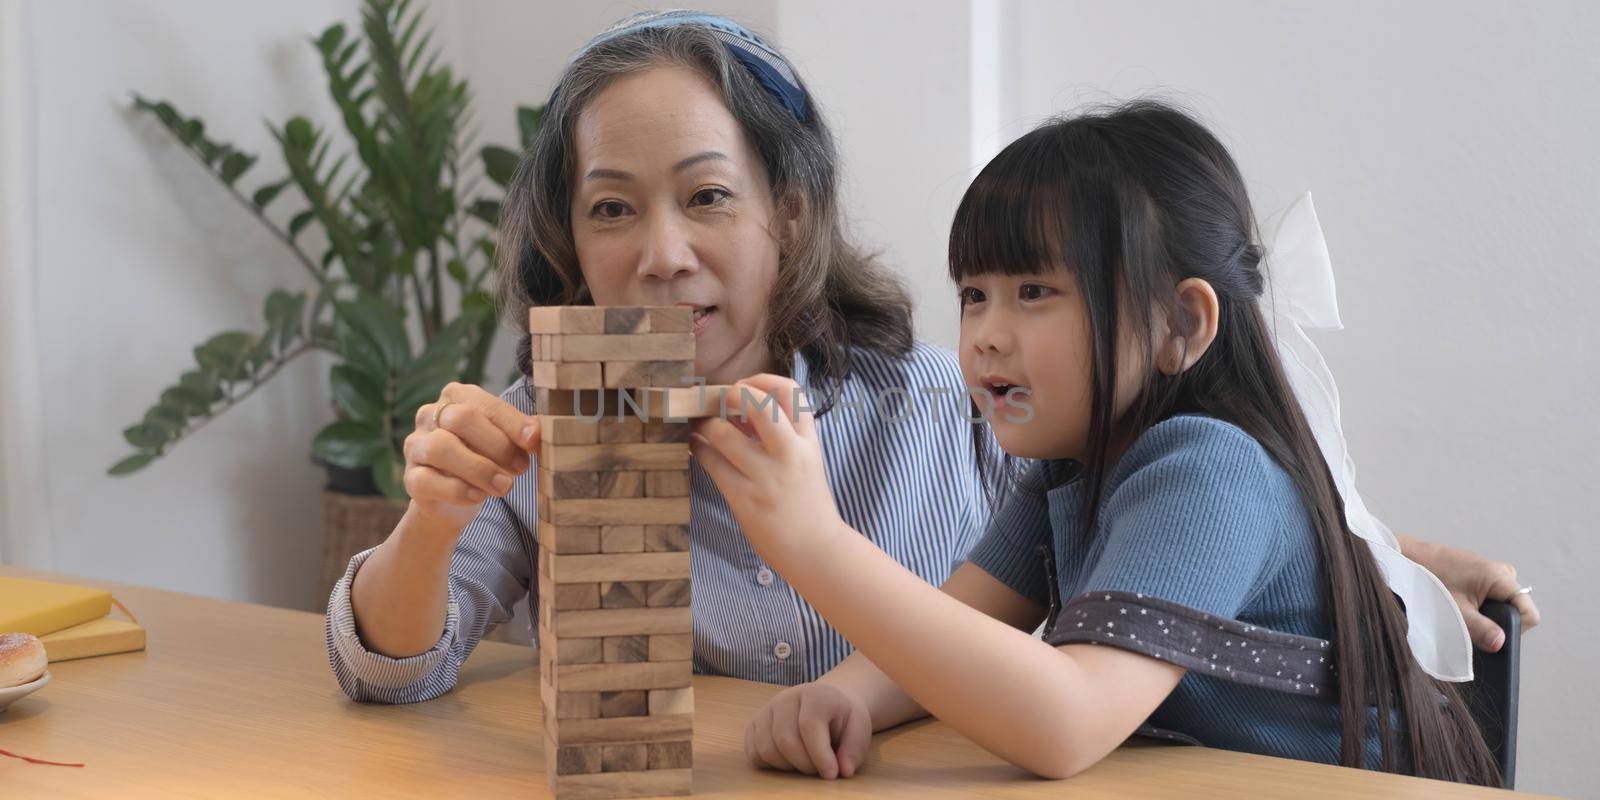 Little girl with her grandma playing jenga game at home.